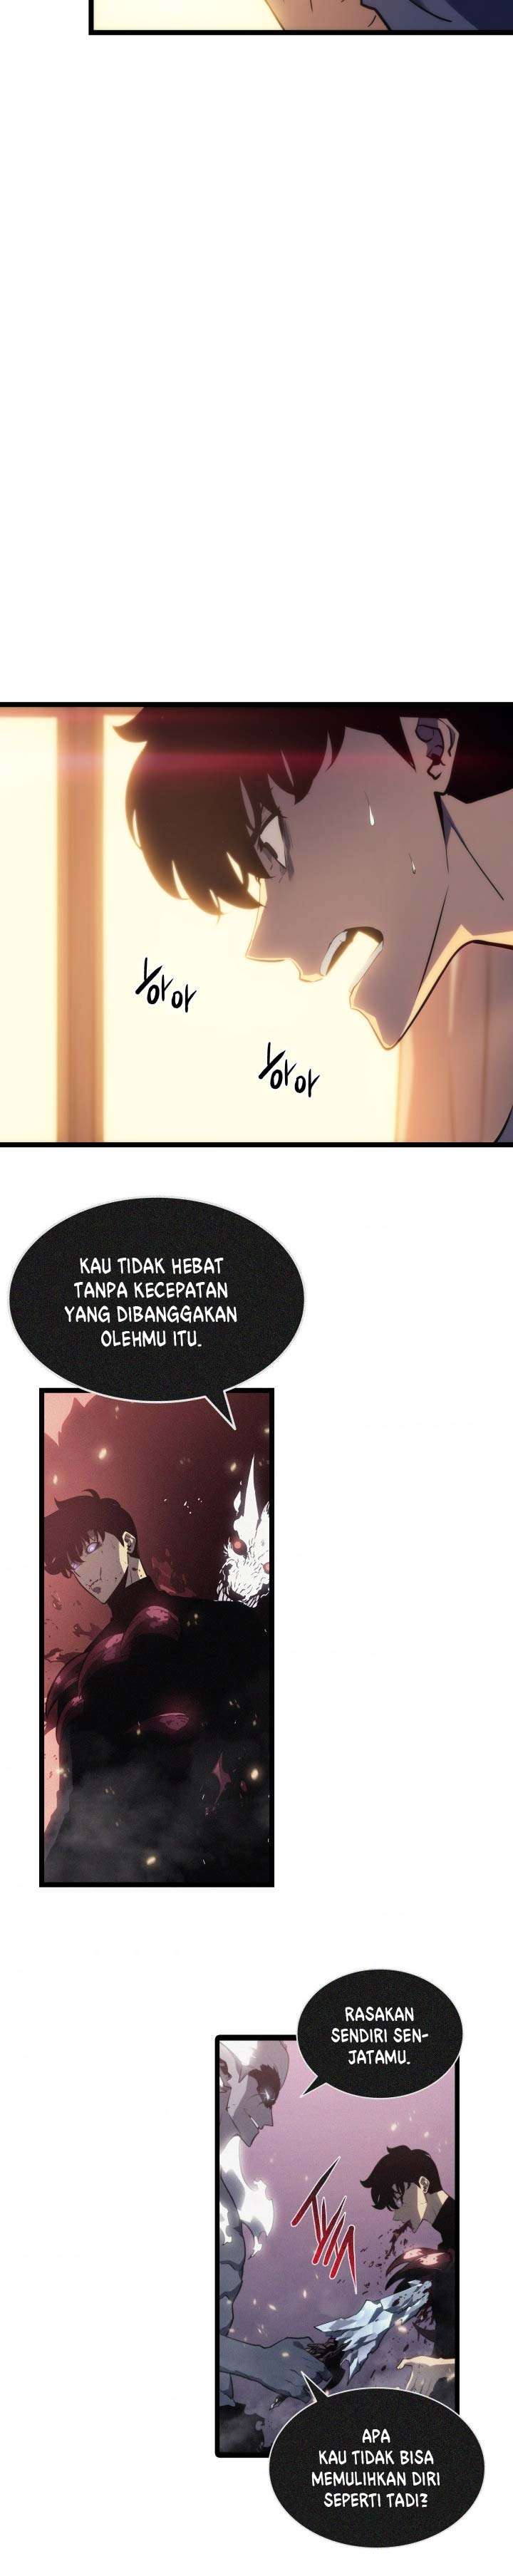 Solo Leveling Chapter 161